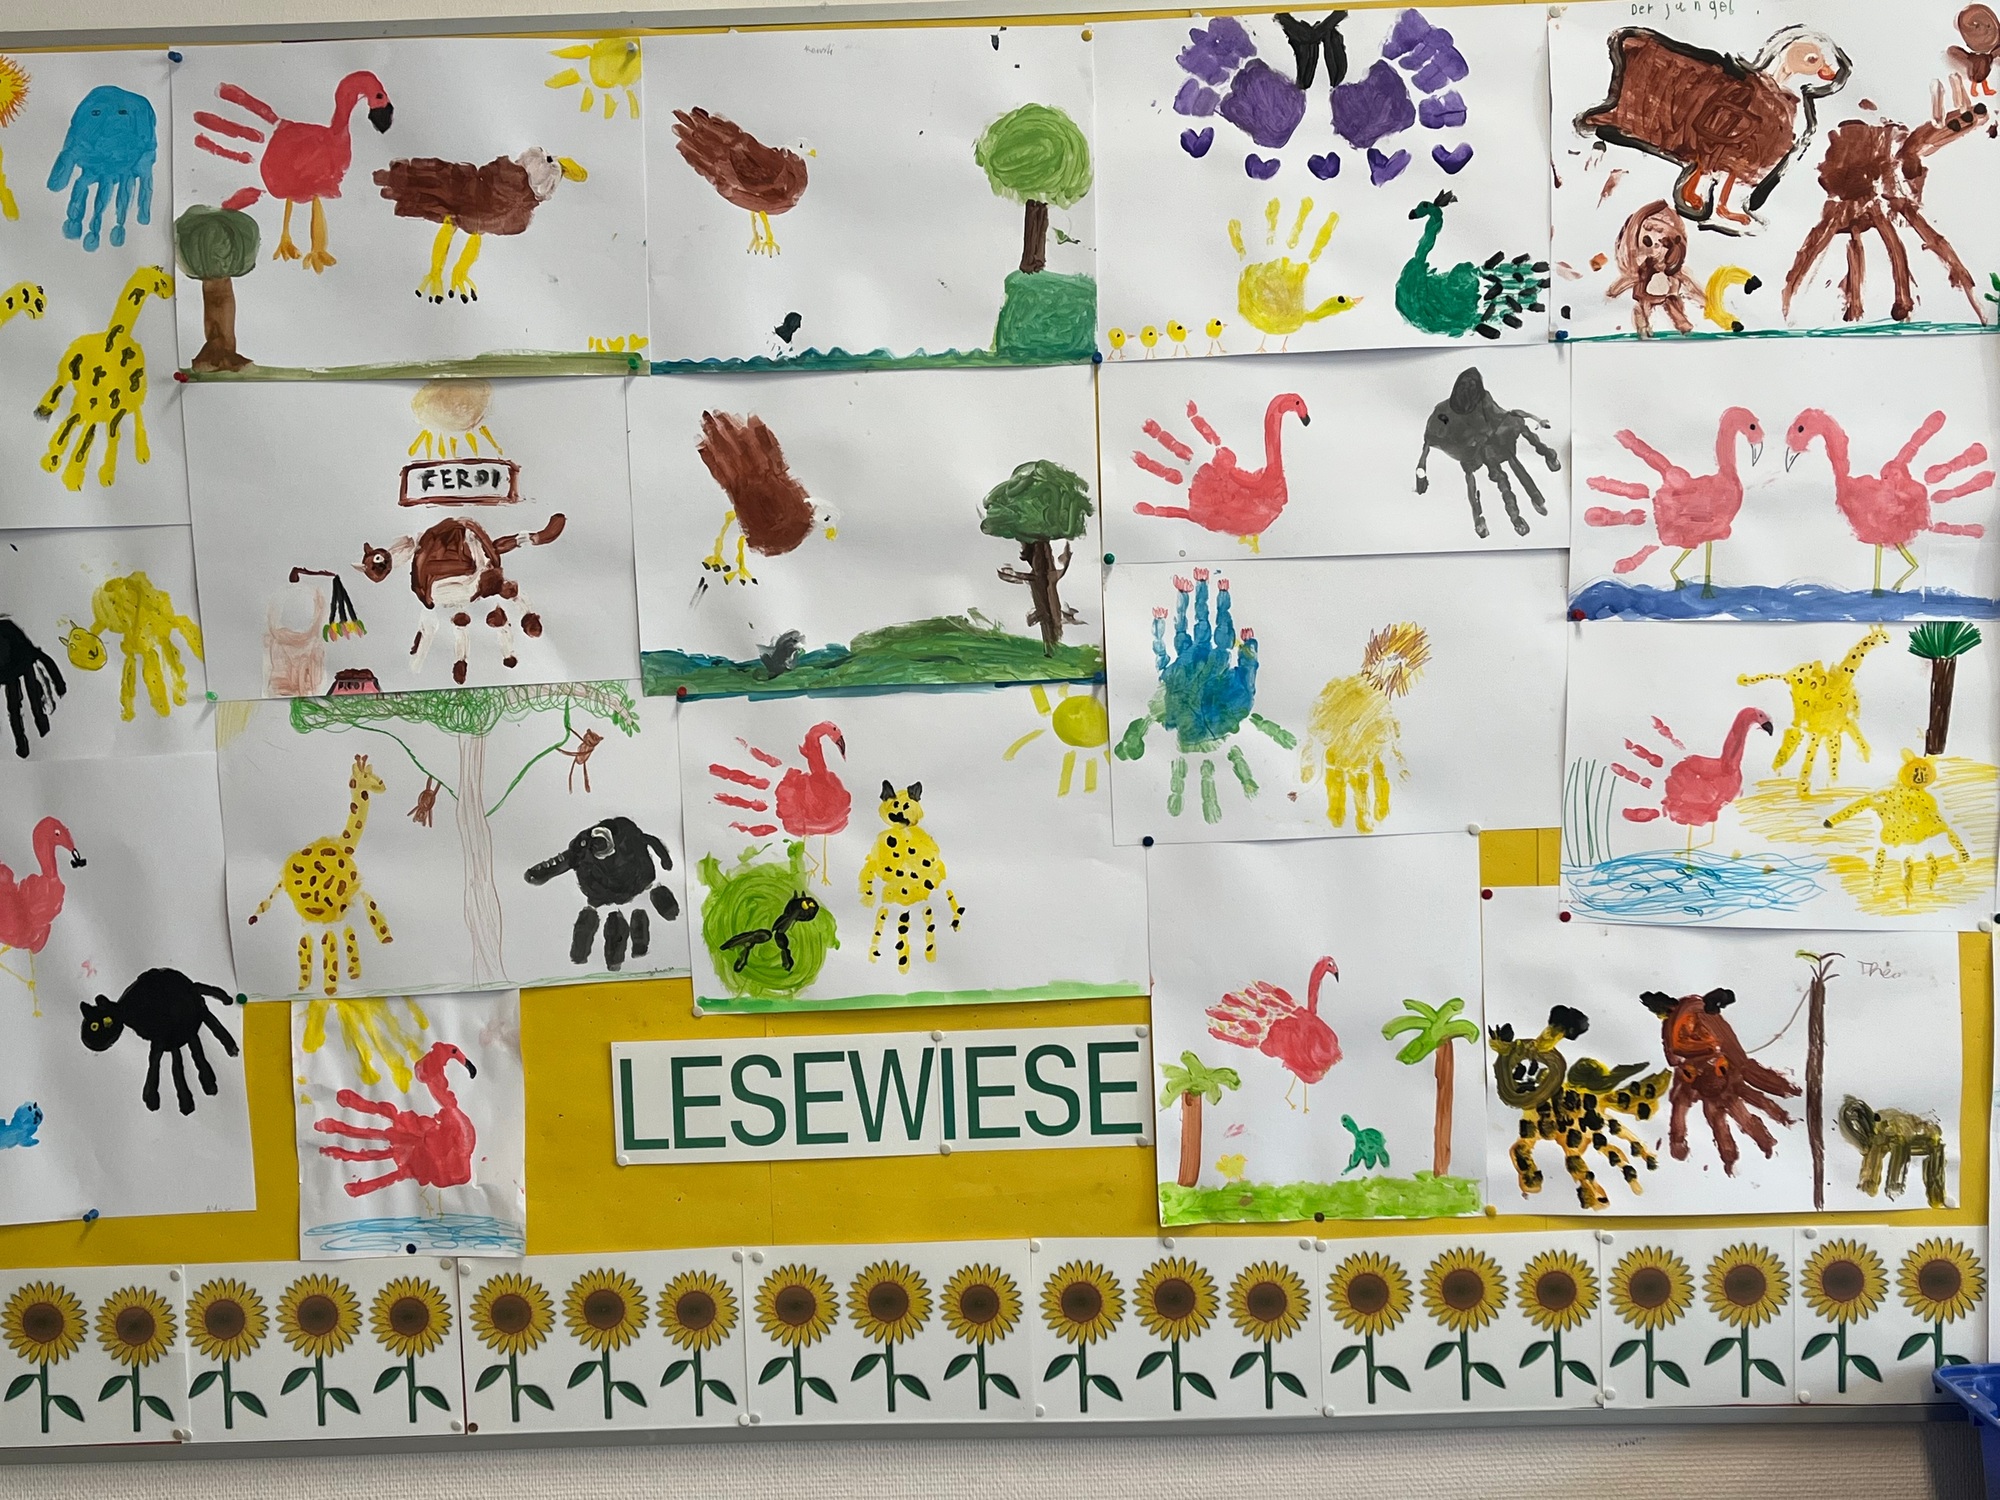 Lesewiese